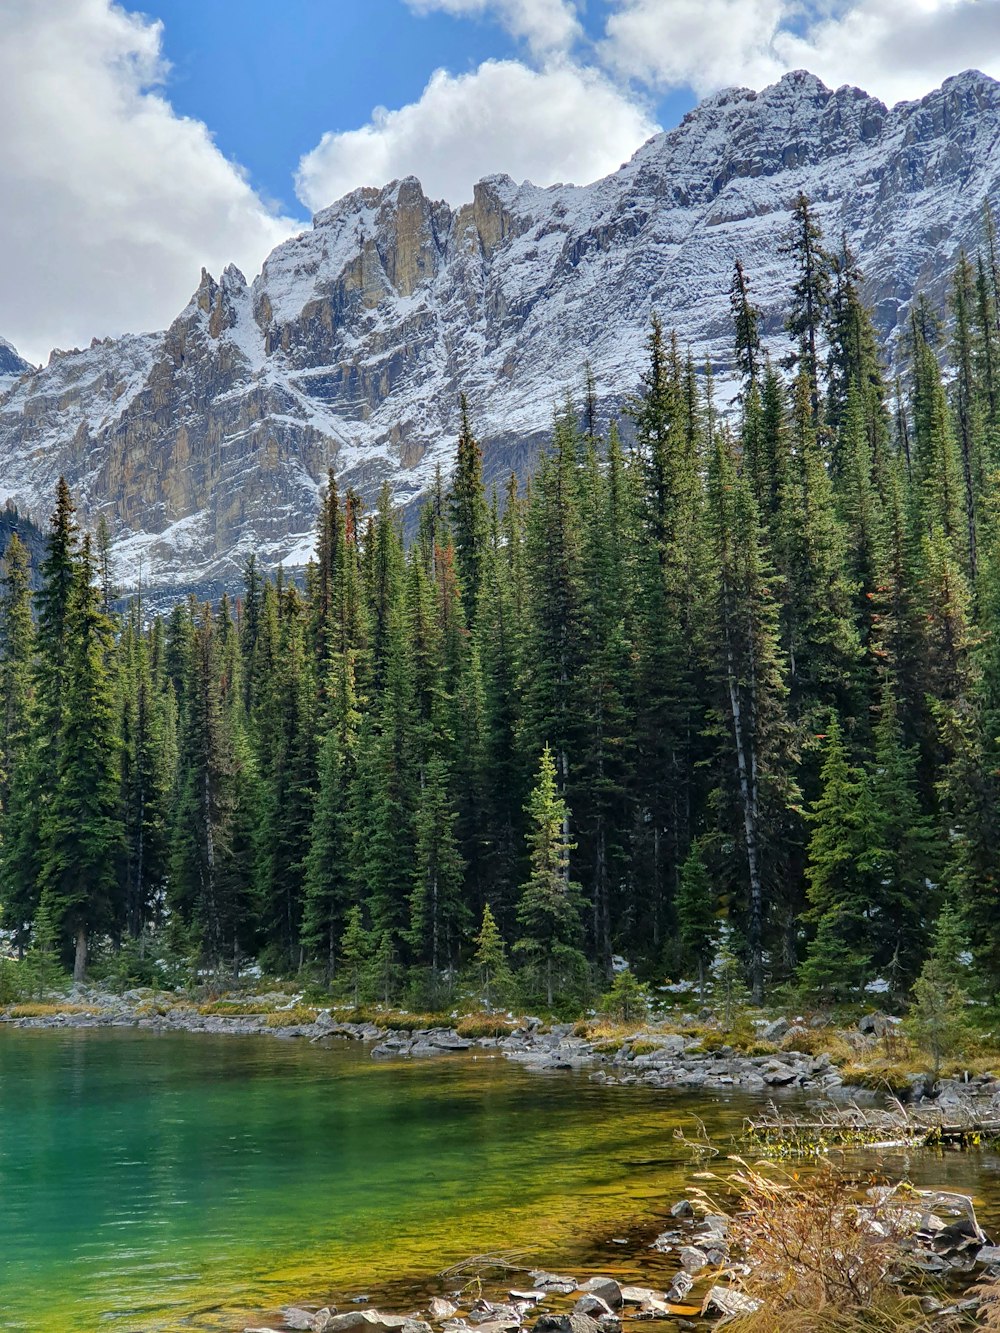 a lake surrounded by pine trees and mountains